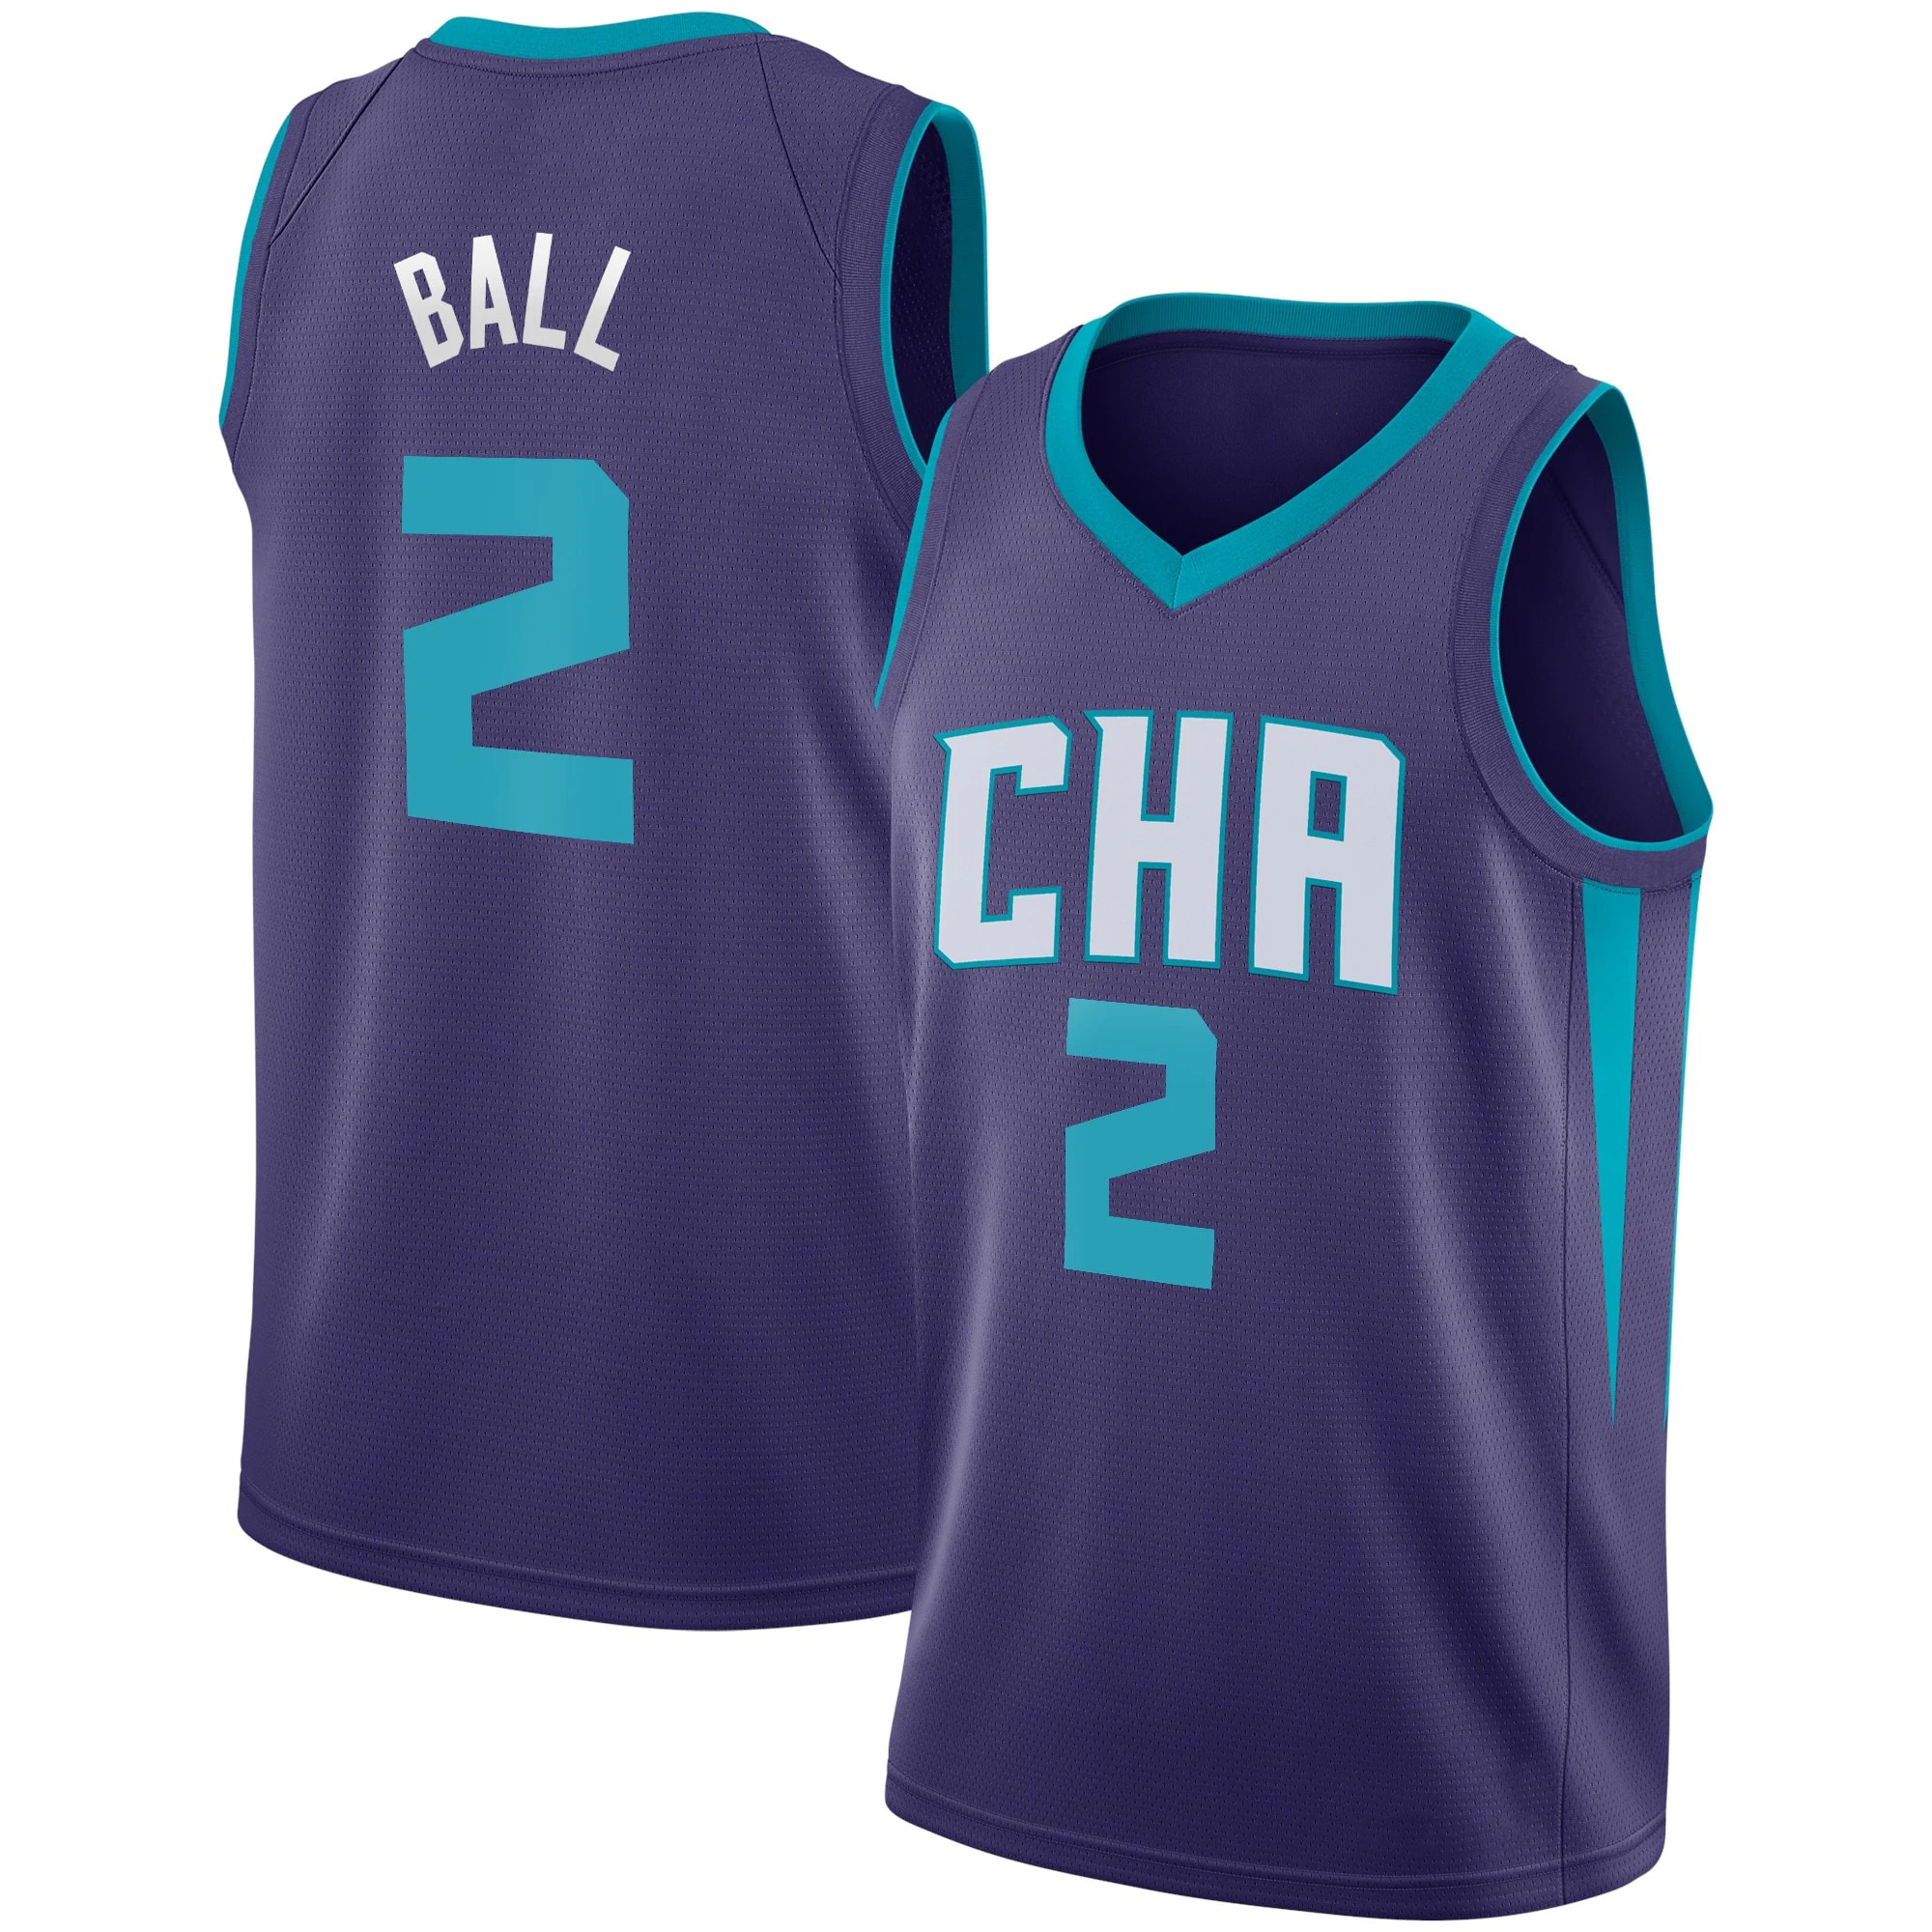 Wholesale 2021-2022 Lamelo Ball 2 City Hornets Jersey Wholesale Best  Quality Stitched Basketball jerseys From m.